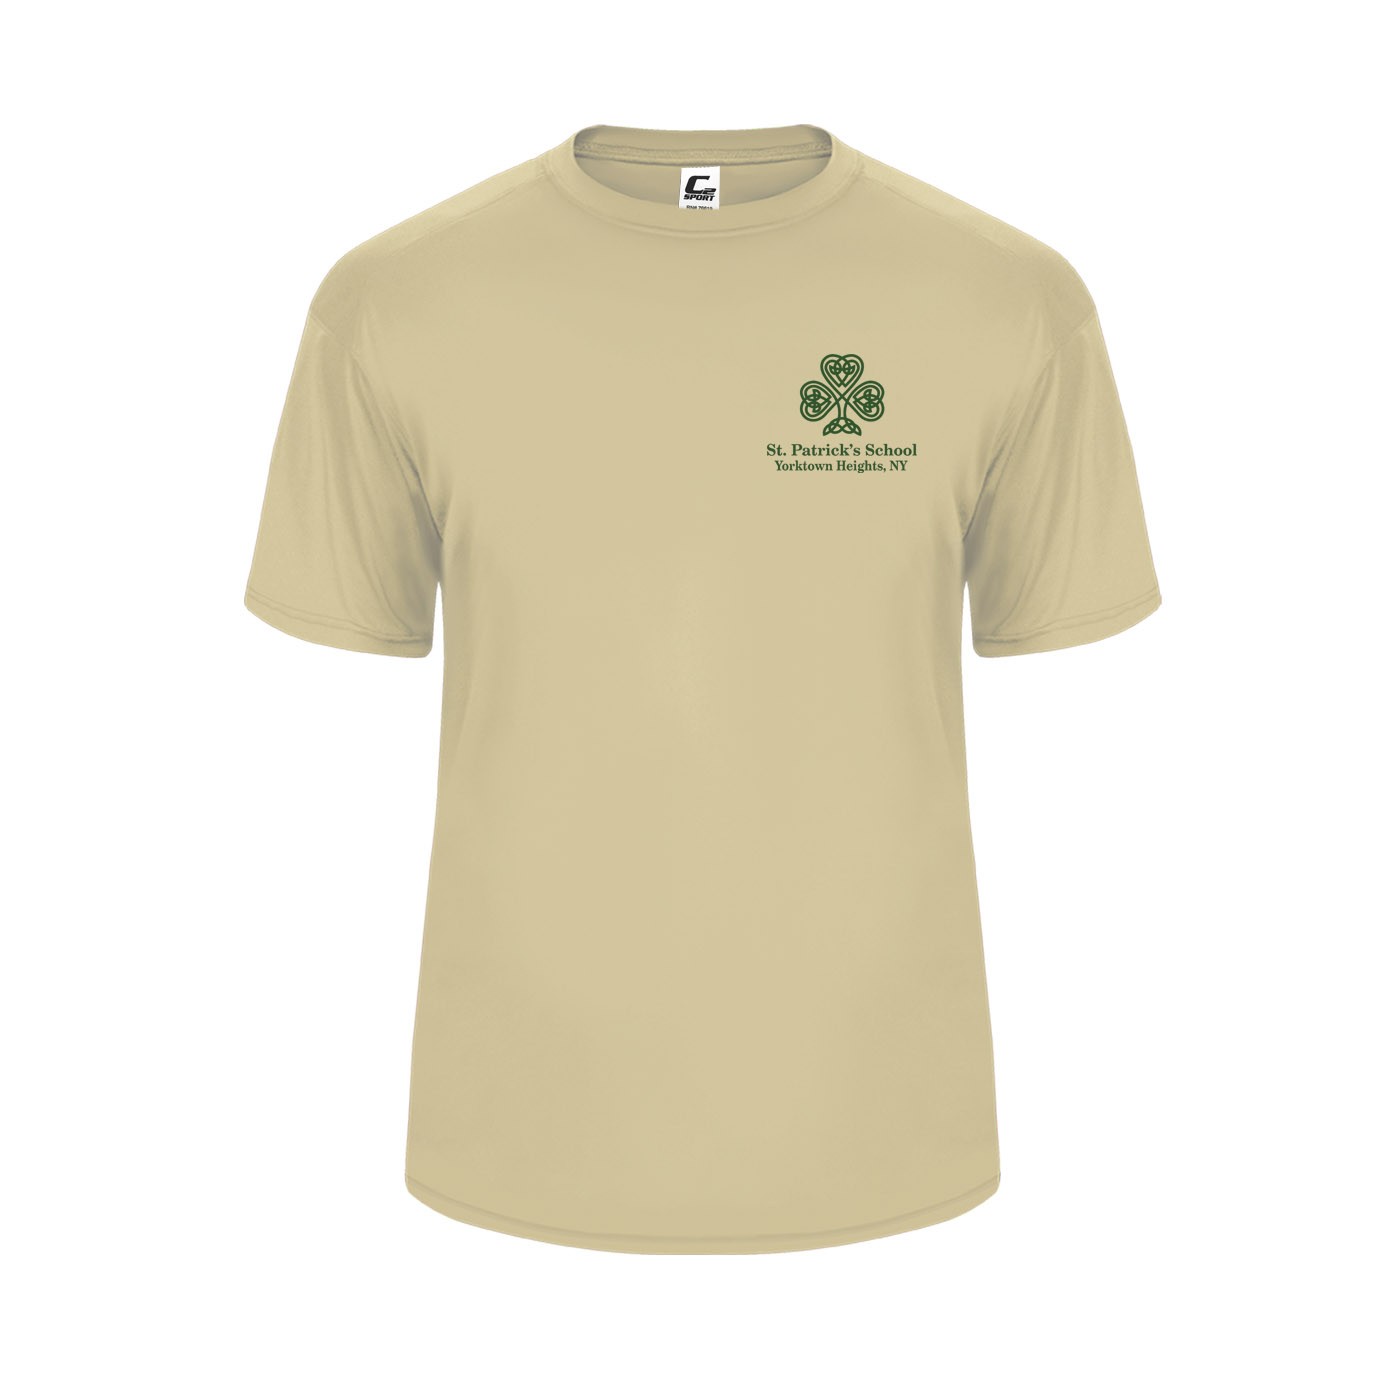 SPS S/S Spirit Performance T-Shirt w/ Left Crest Green Logo - Please Allow 2-3 Weeks for Delivery